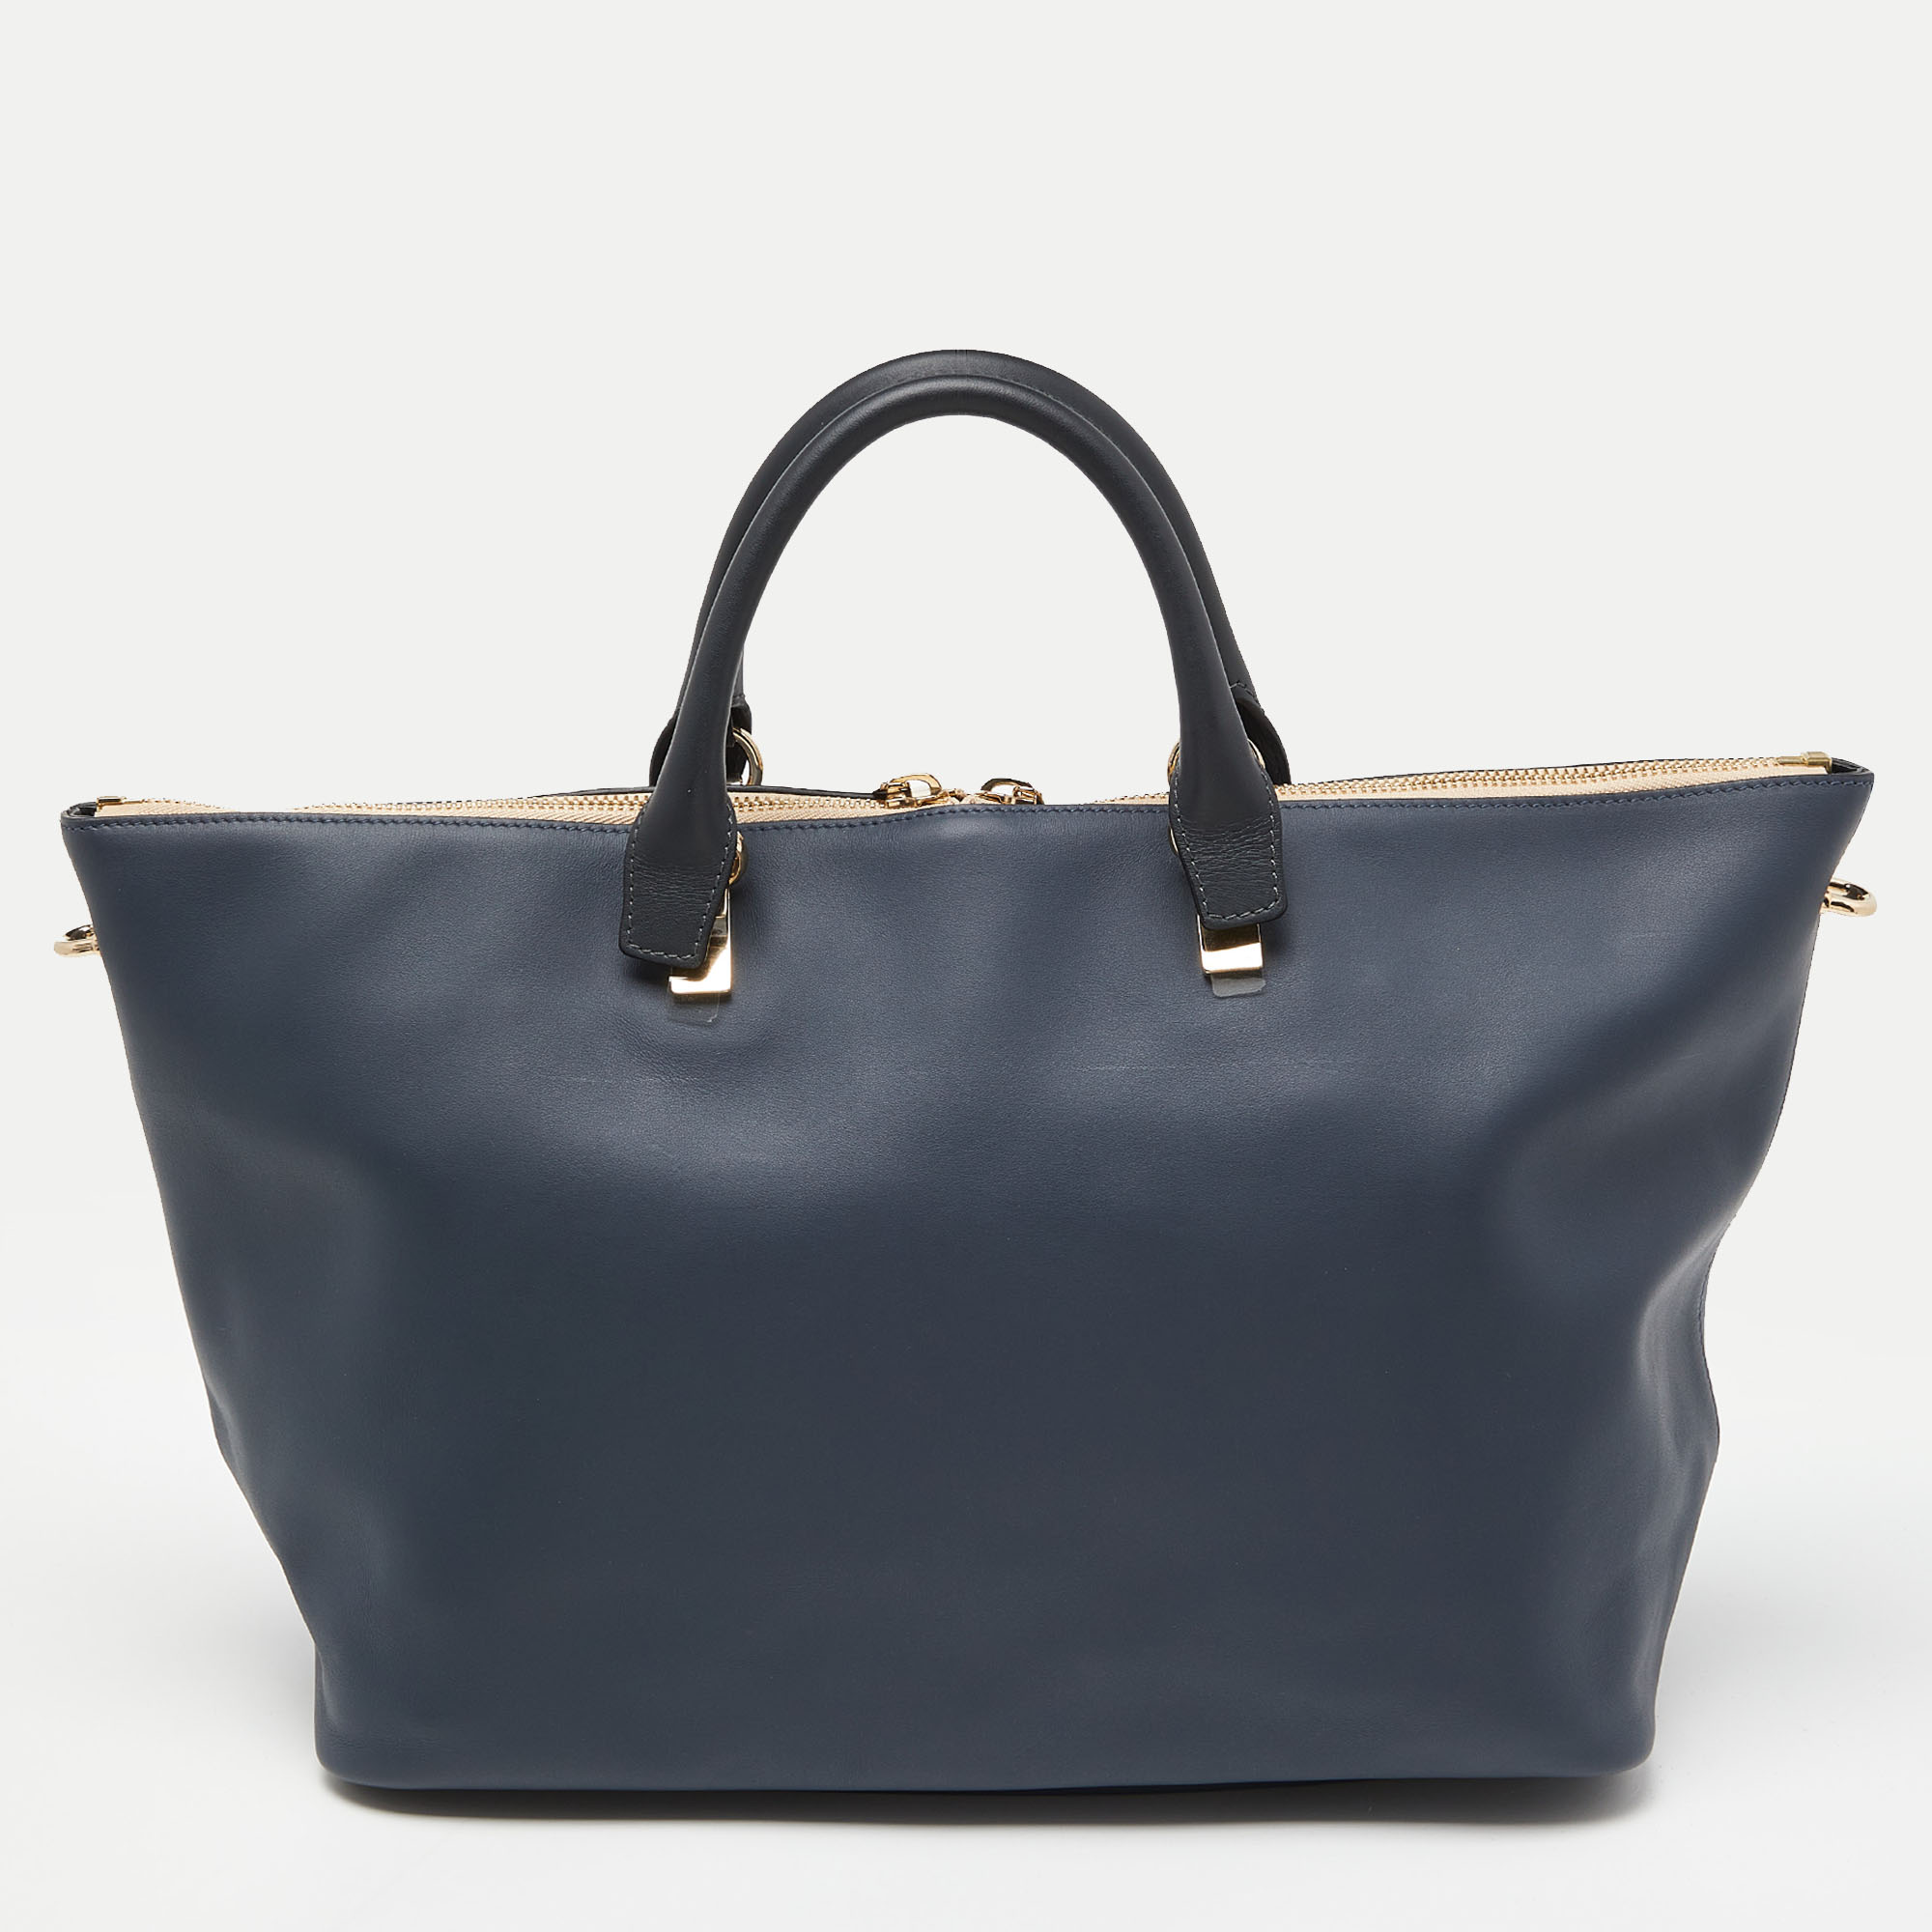 Chloe Two Tone Blue Leather Large Baylee Tote